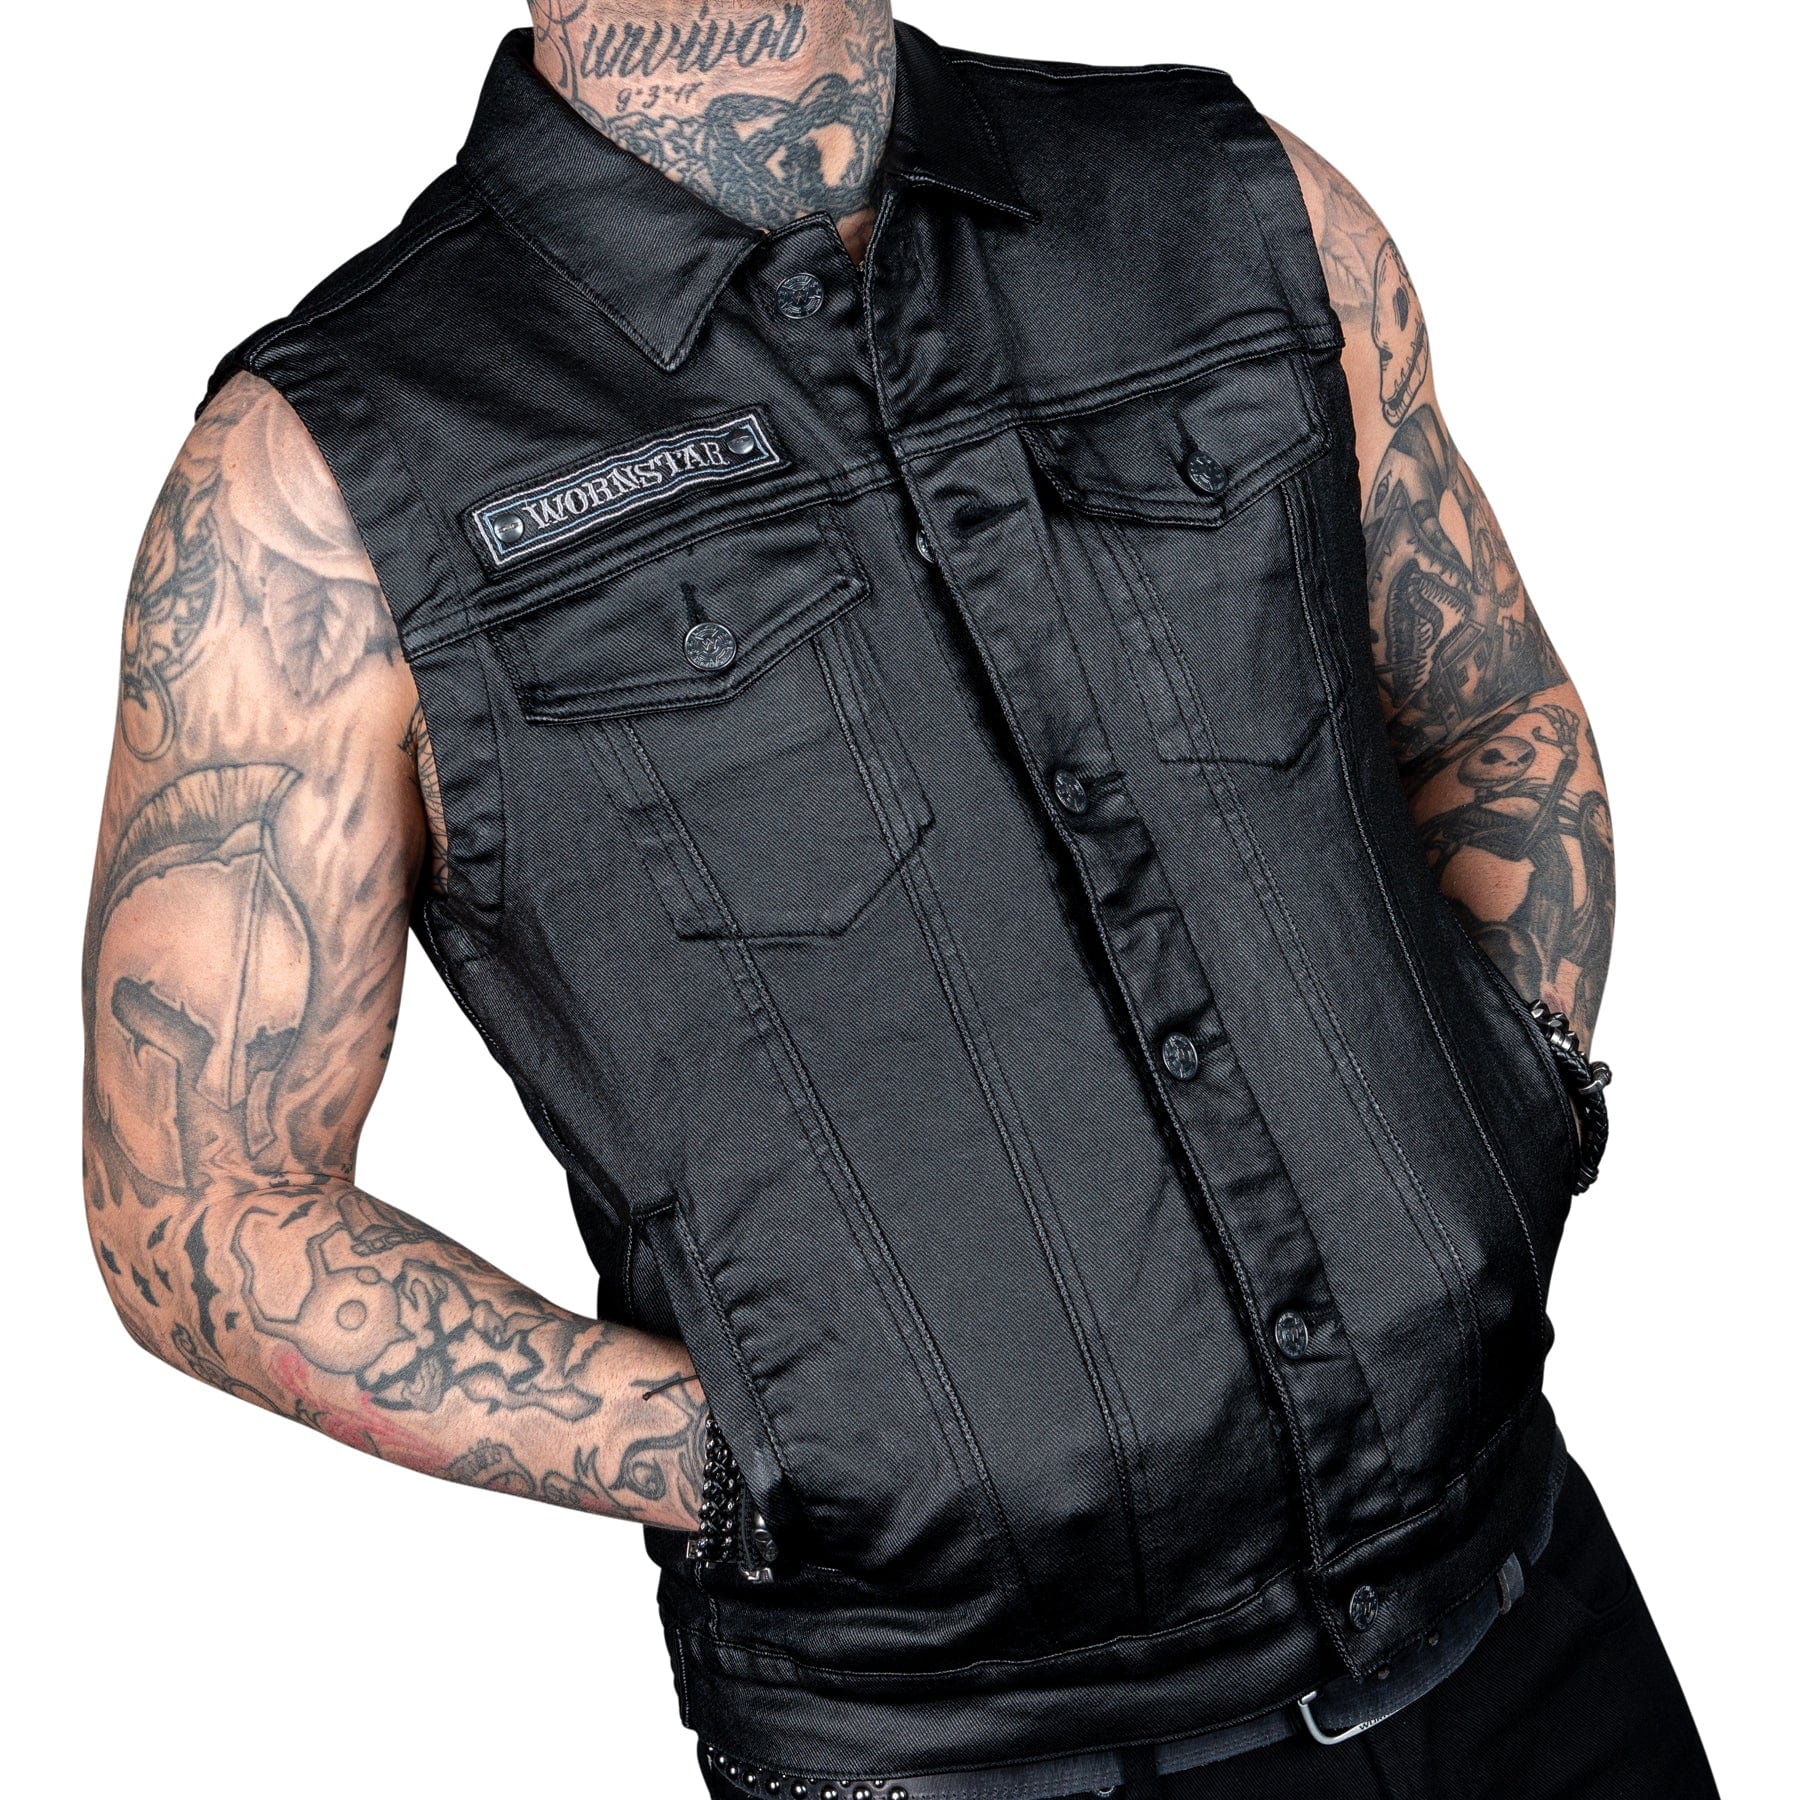 All Access Collection Jacket Idolmaker Waxed Denim Vest